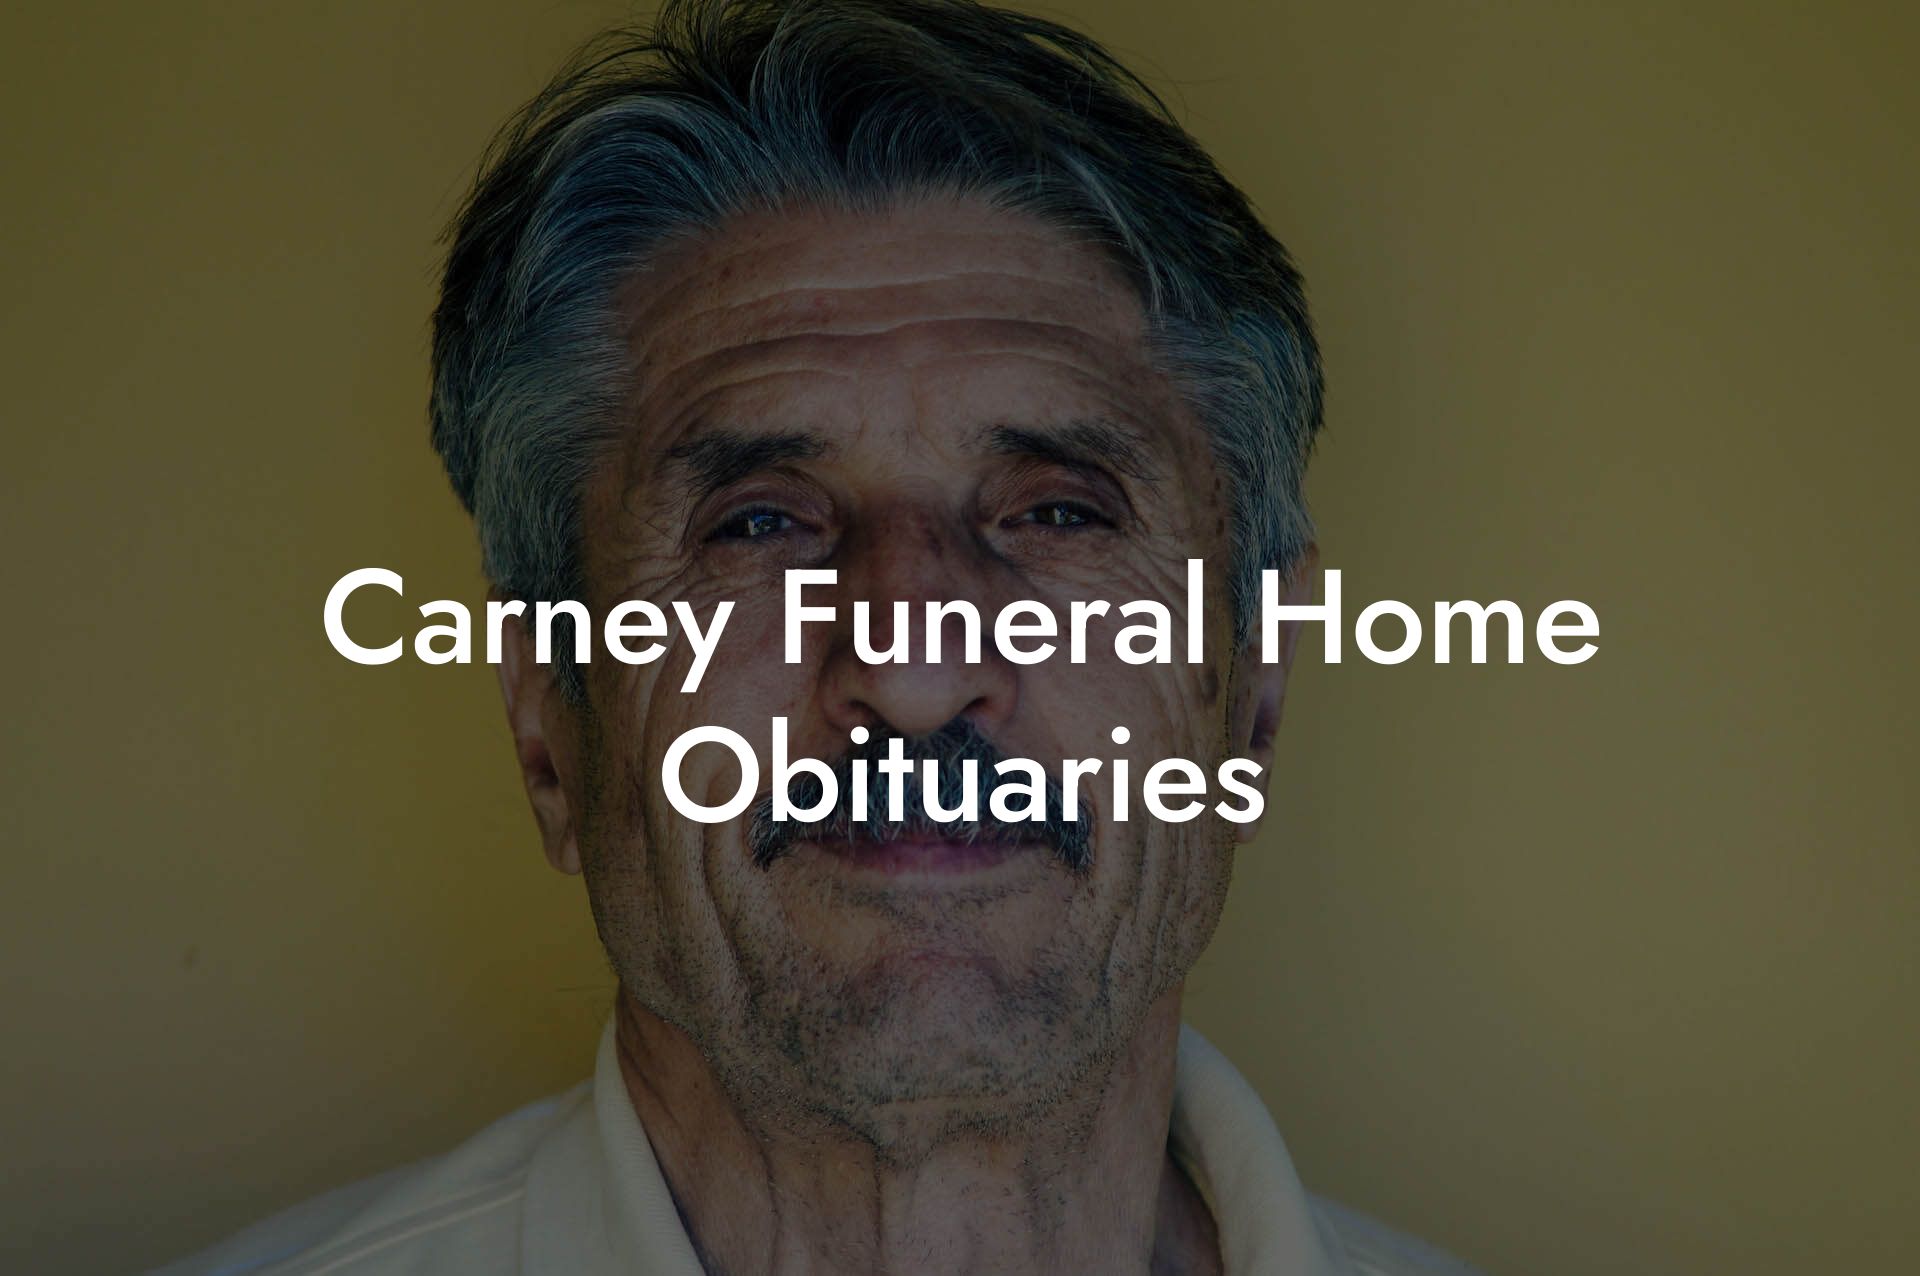 Carney Funeral Home Obituaries